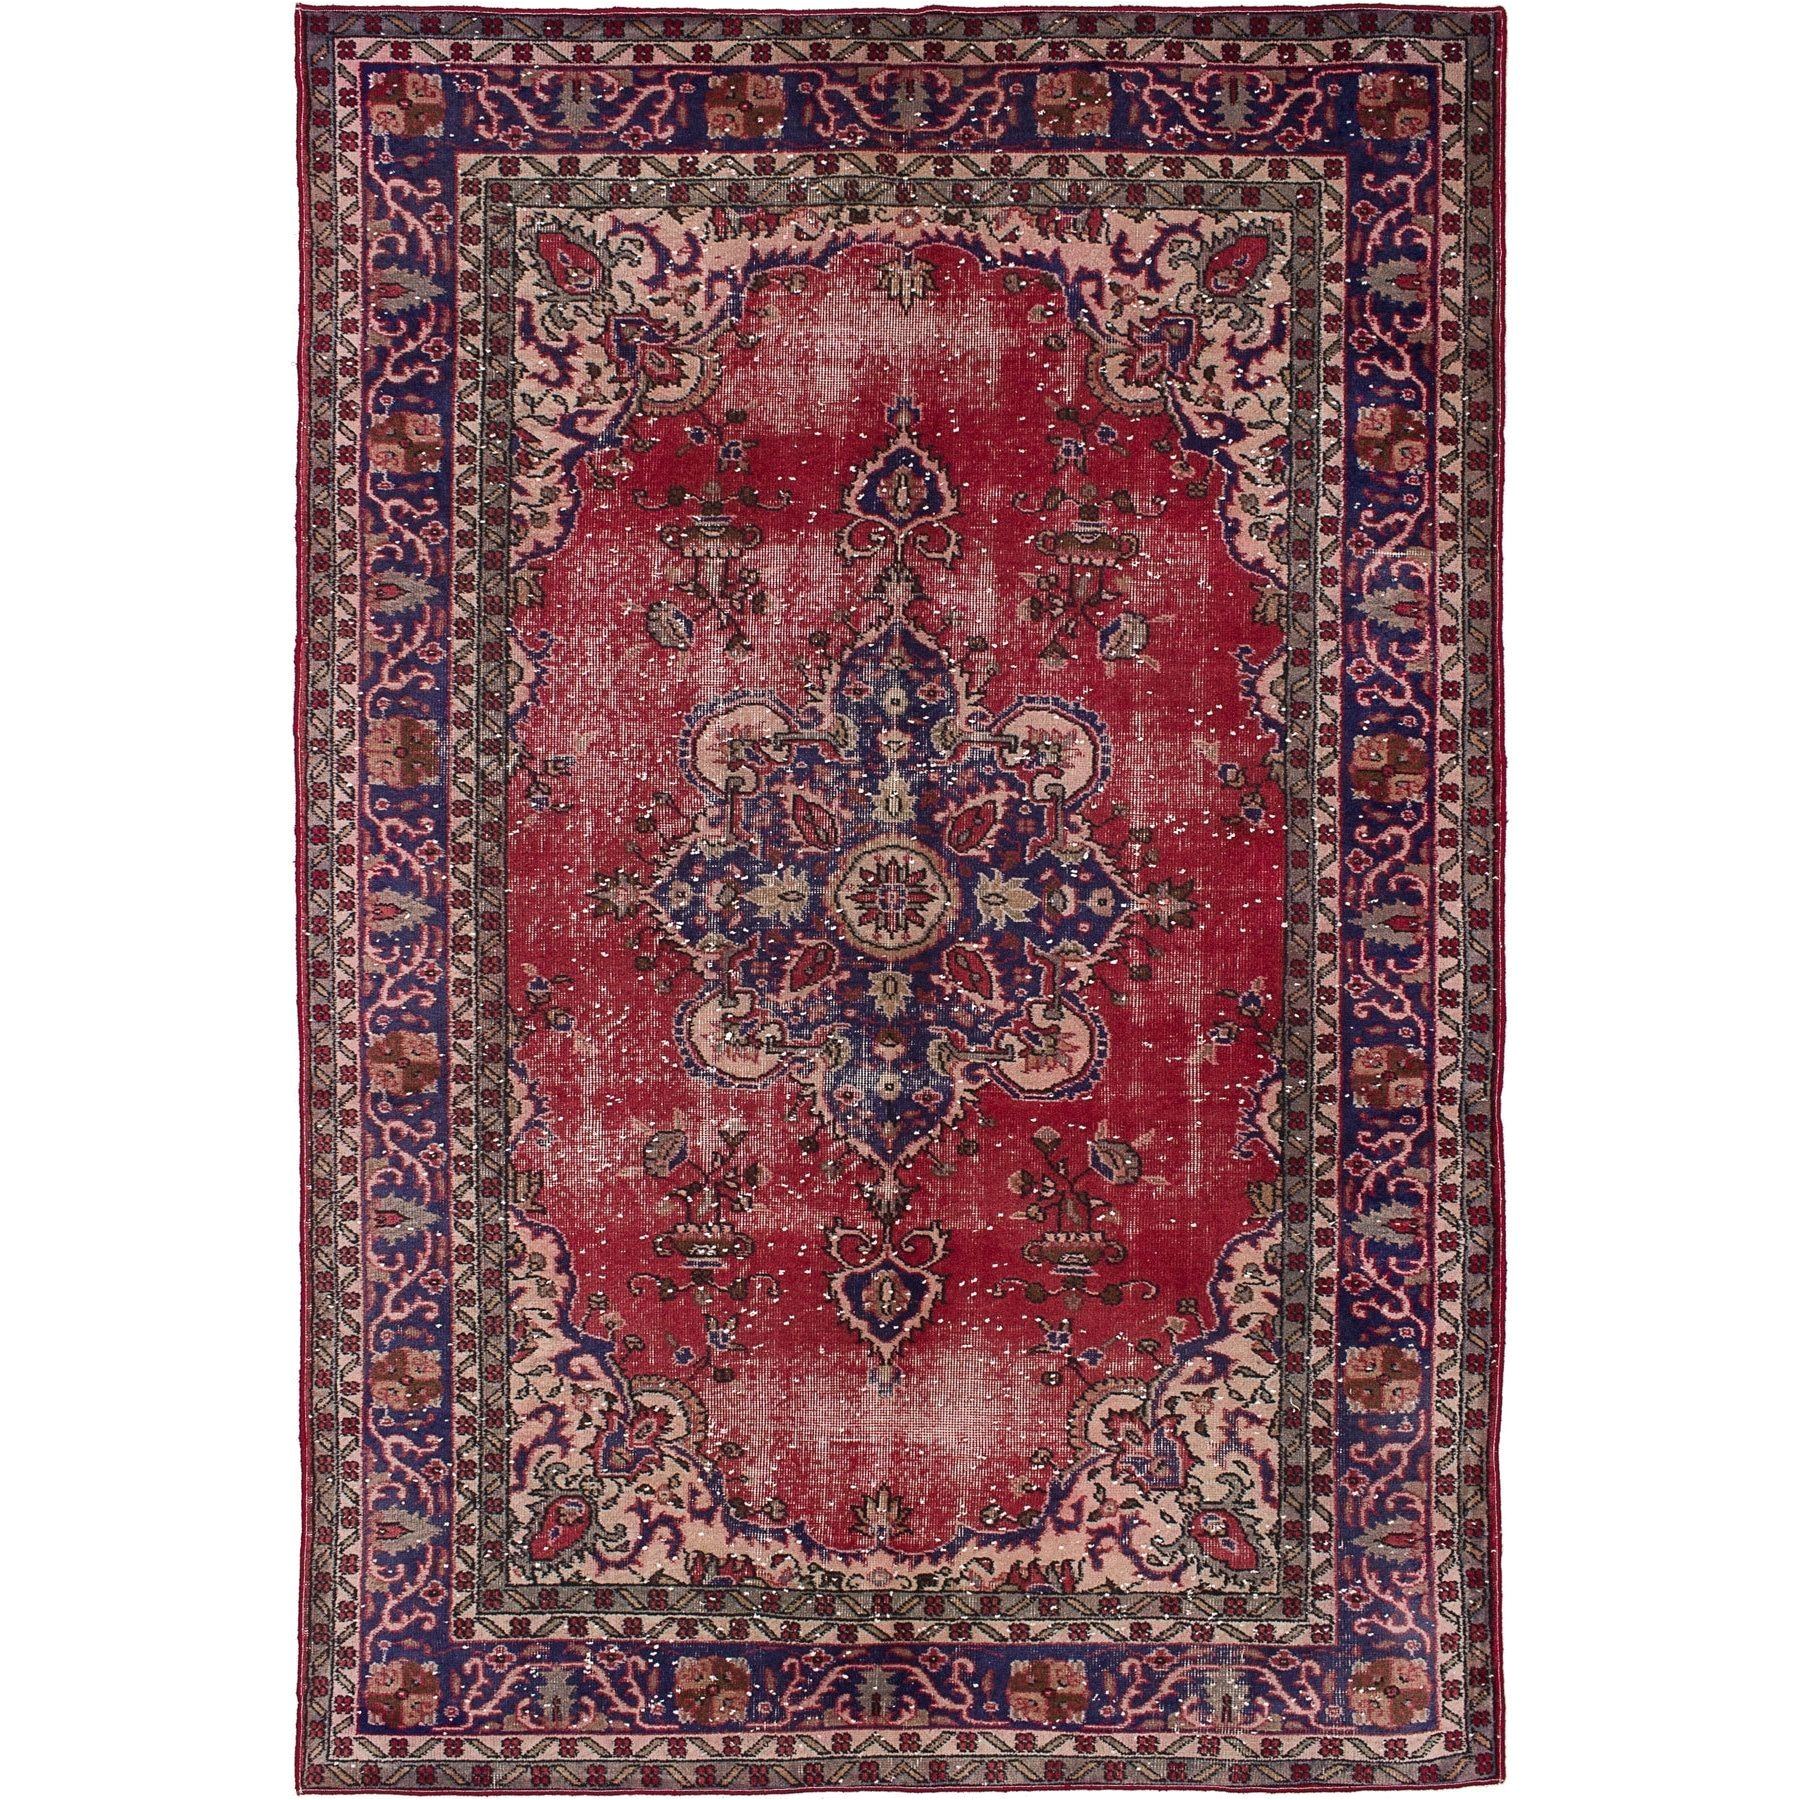 ecarpetgallery hand knotted melis vintage red wool rug 6 3 x 9 5 red rug 6 x 9 size 6 x 9 cotton oriental